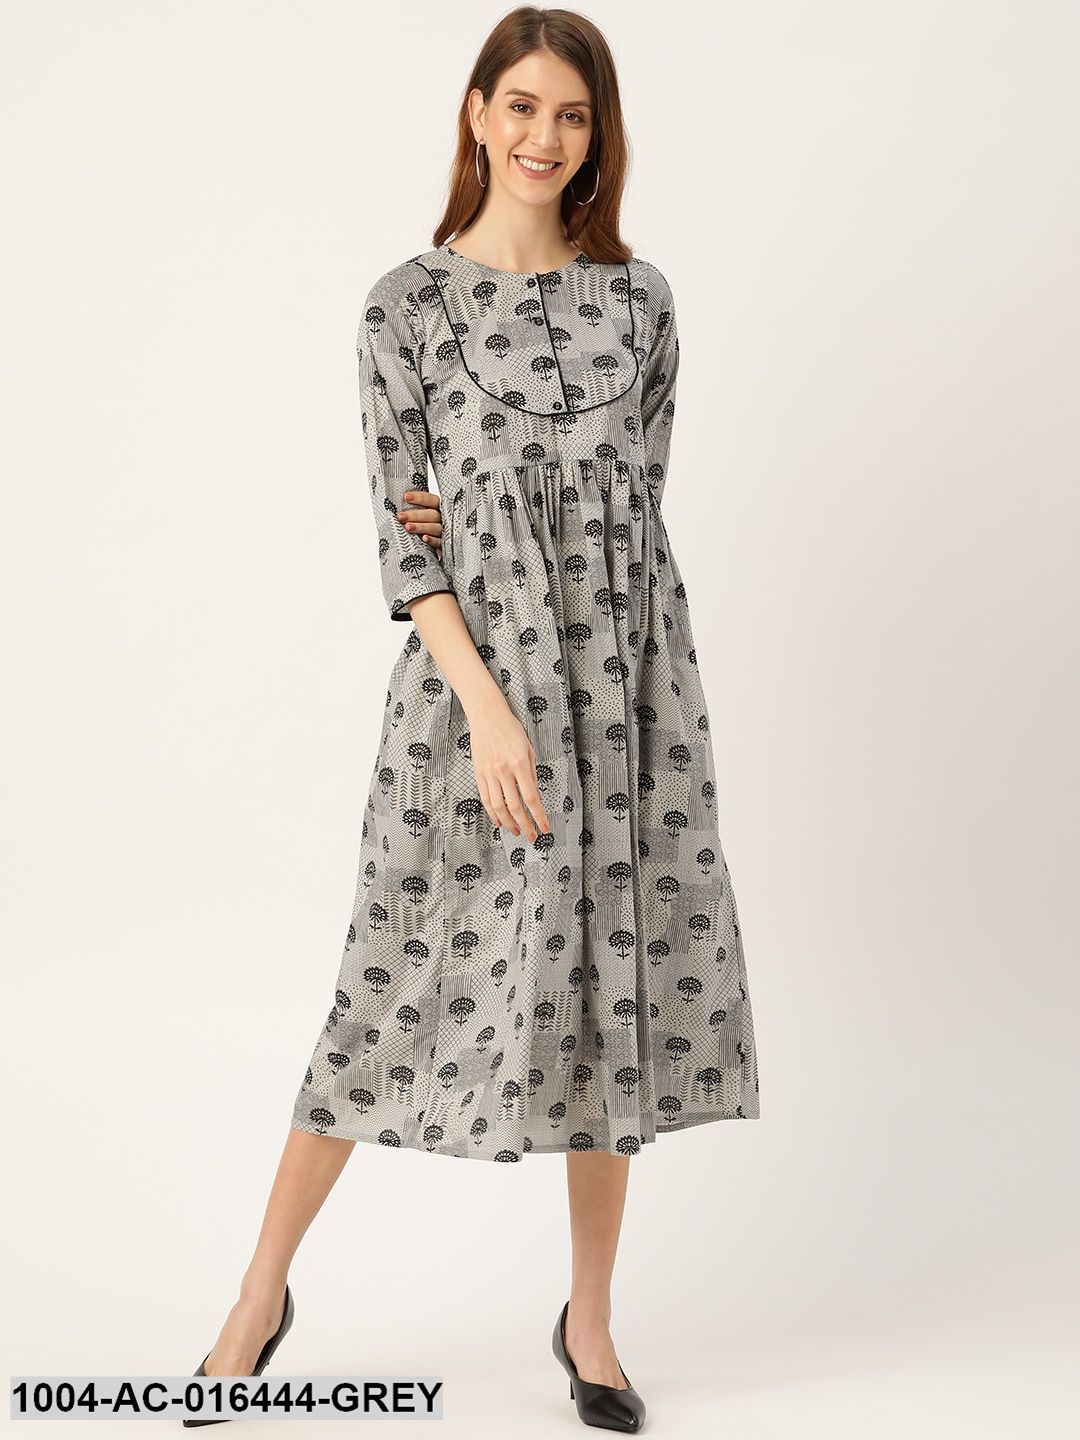 Grey Floral Printed Round Neck Cotton A-Line Dress